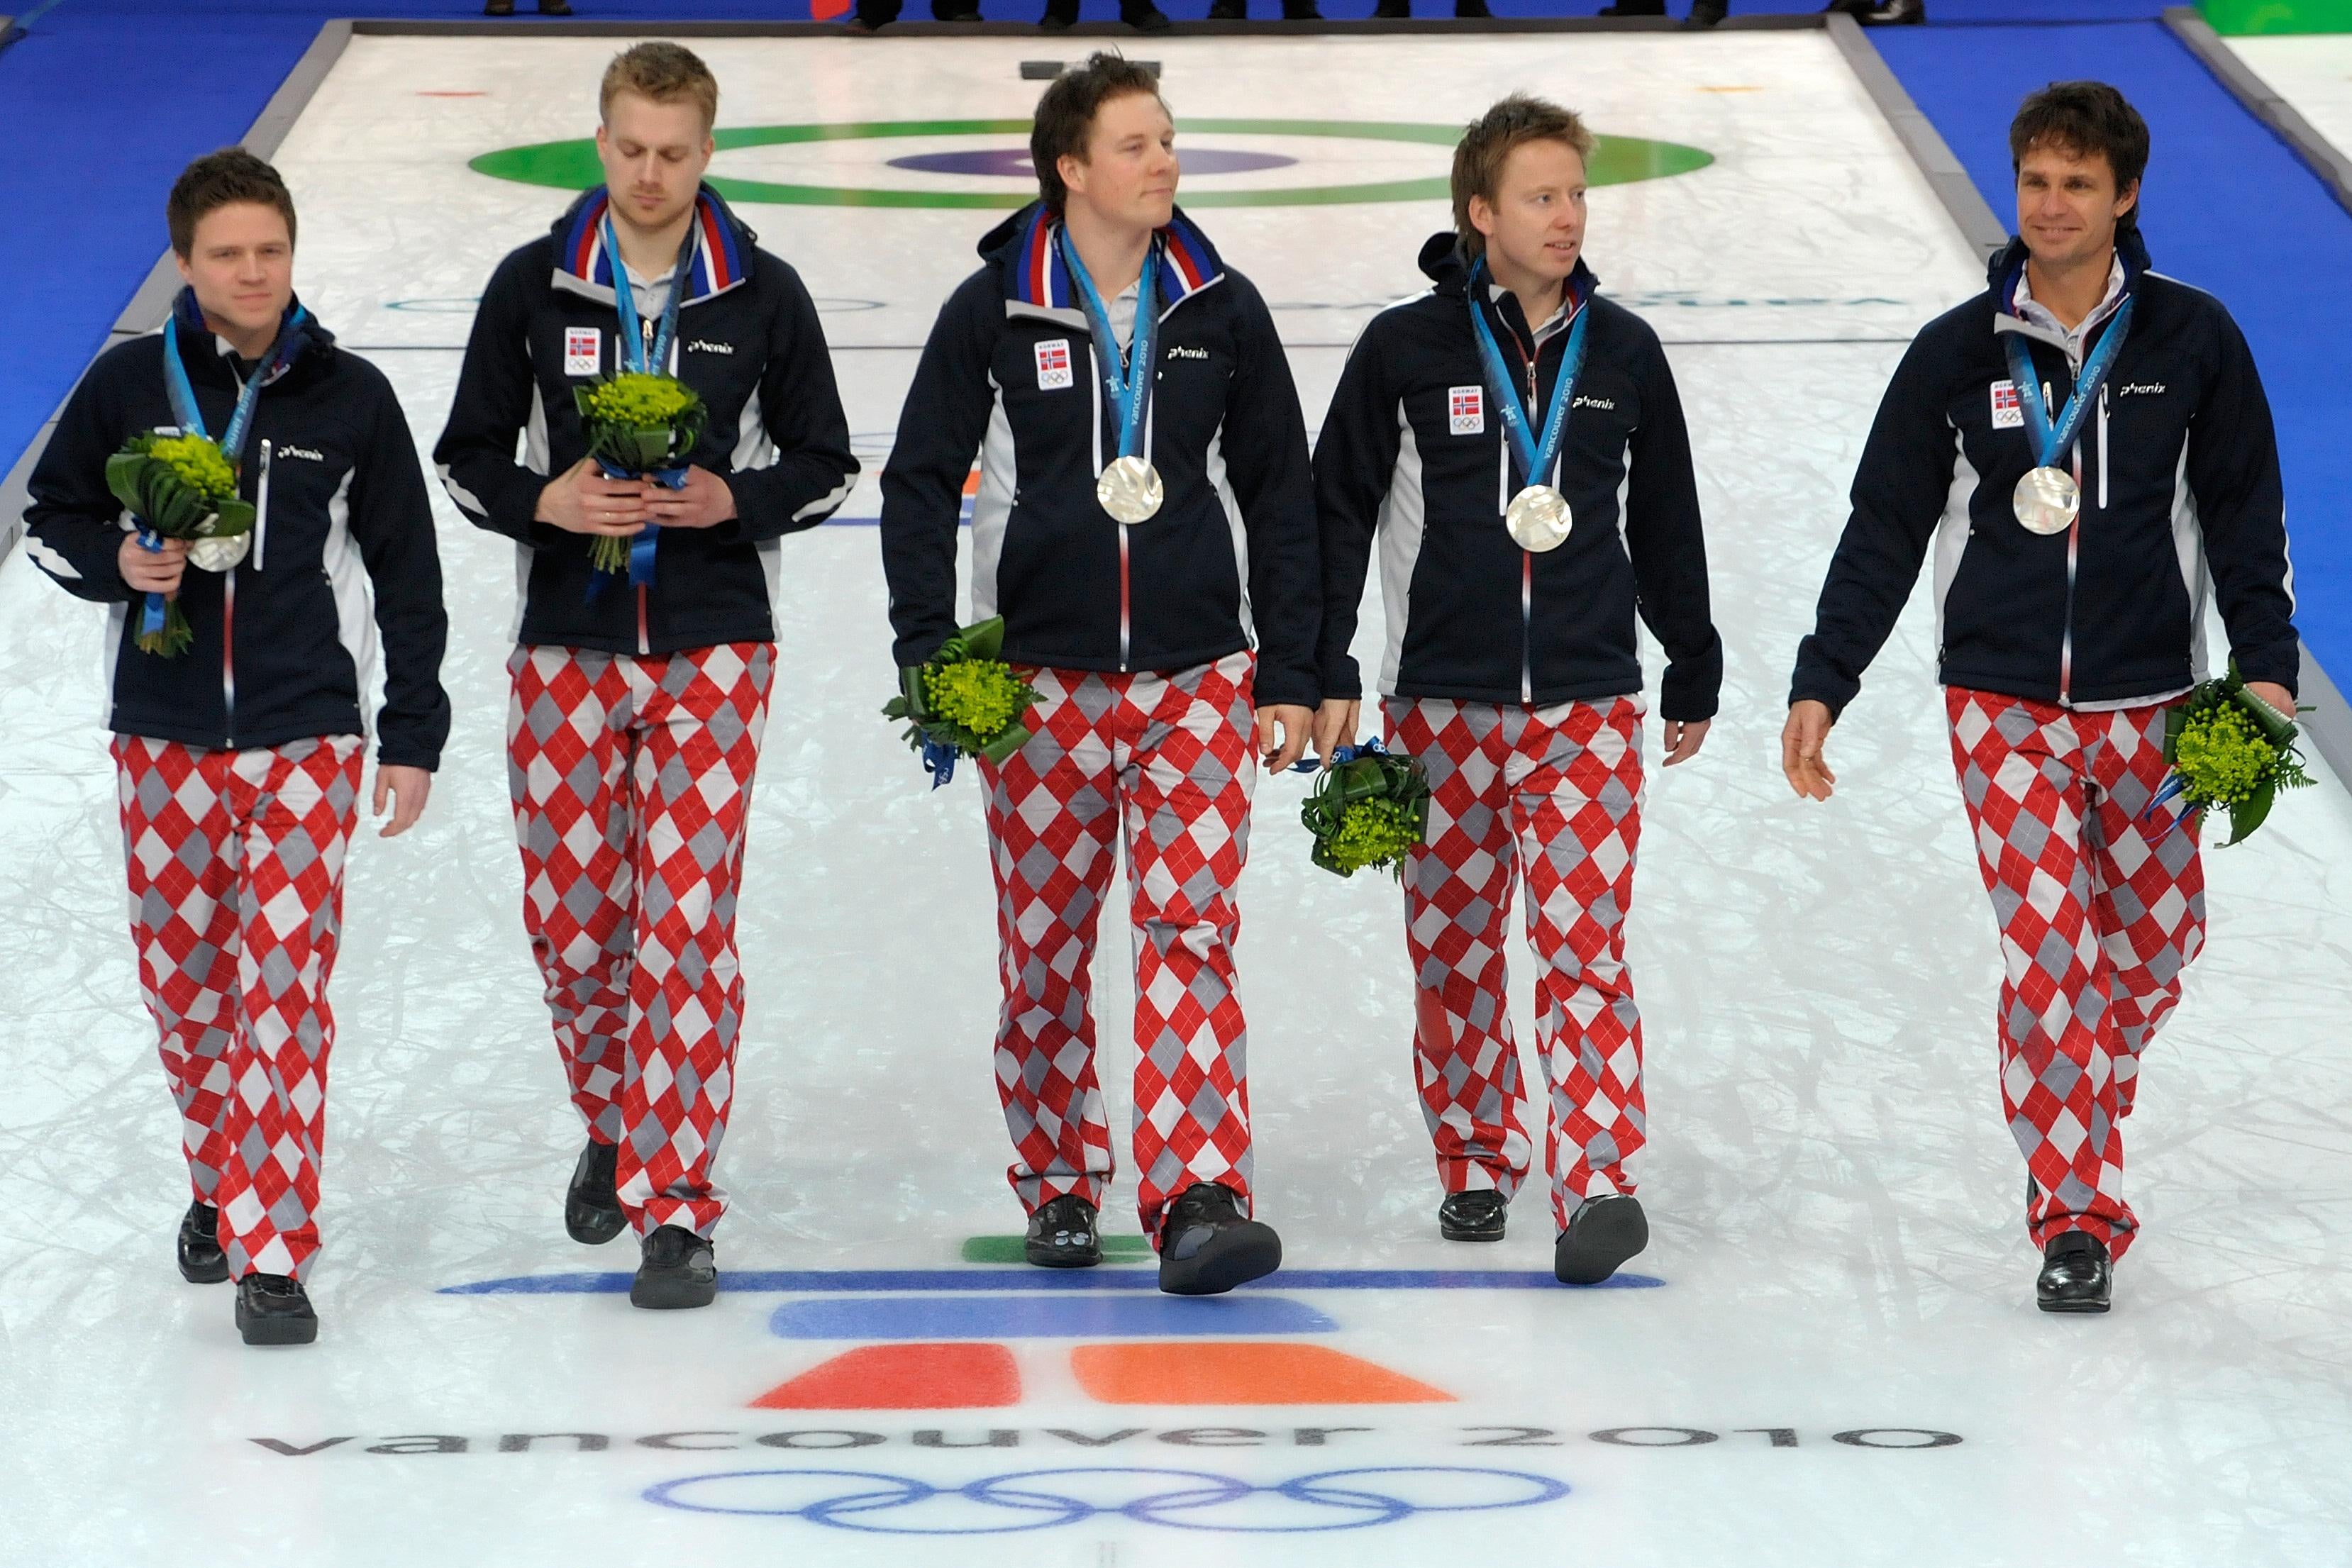 Silver medal winner Norway team, (L-R) Thomas Loevold, Haavard Vad Petersson, Christoffer Svae, Torger Nergaard and Thomas Ulsrud march on the sheet during the medal presentation ceremony after their Vancouver Winter Olympics men's curling gold medal match at the Vancouver Olympic Centre, on February 27, 2010.    AFP PHOTO / TOSHIFUMI KITAMURA (Photo credit should read TOSHIFUMI KITAMURA/AFP/Getty Images)